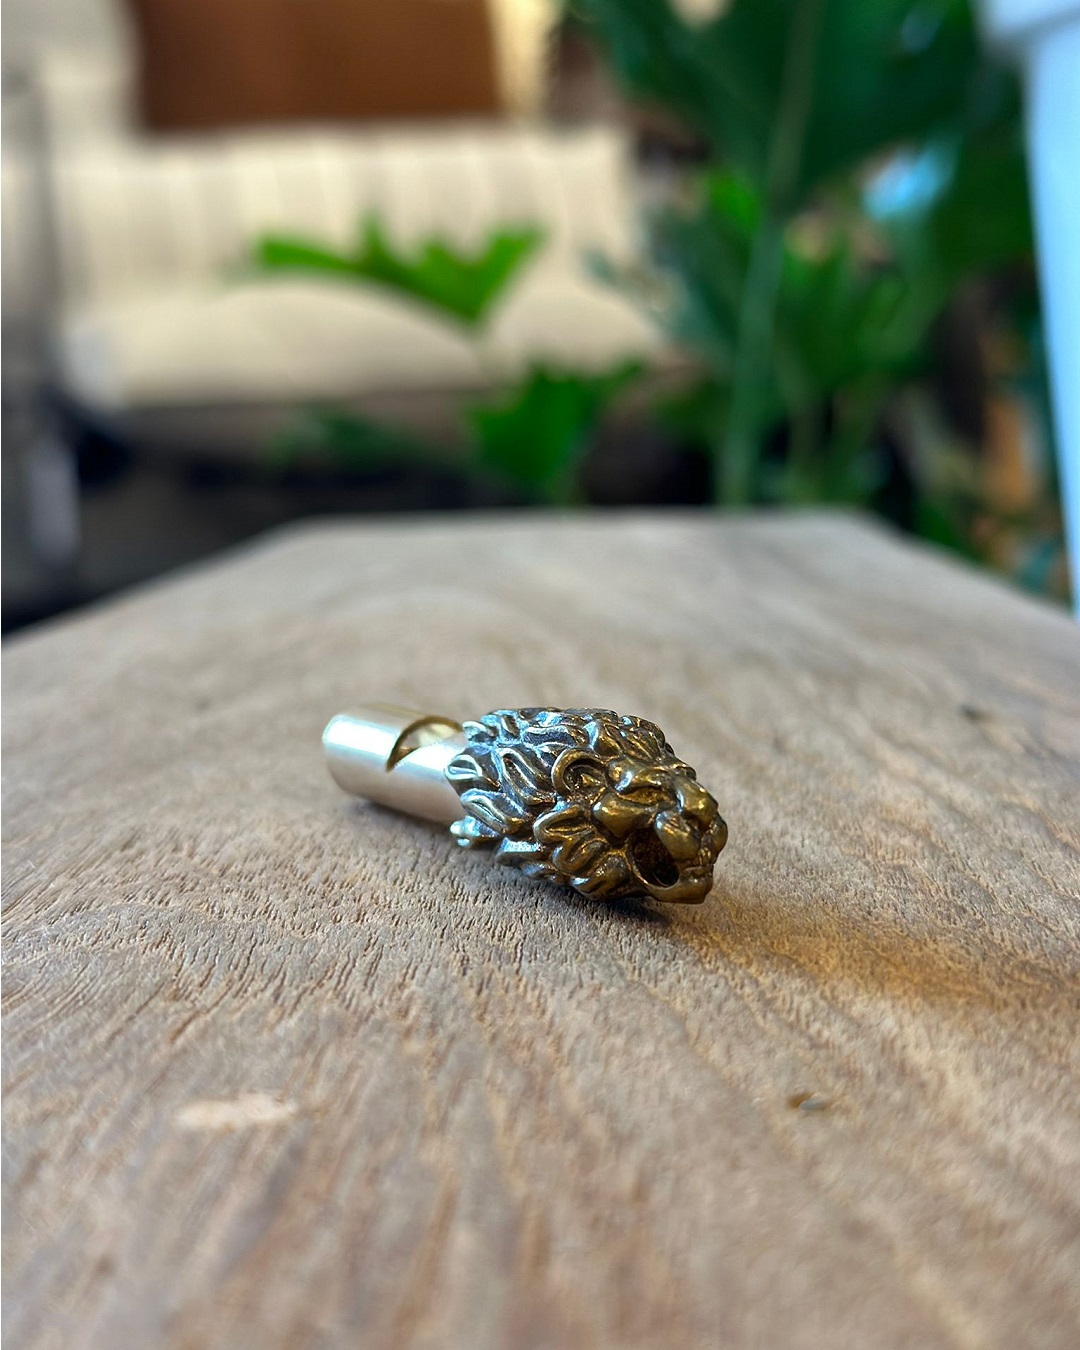 Gold lion keyring on a table